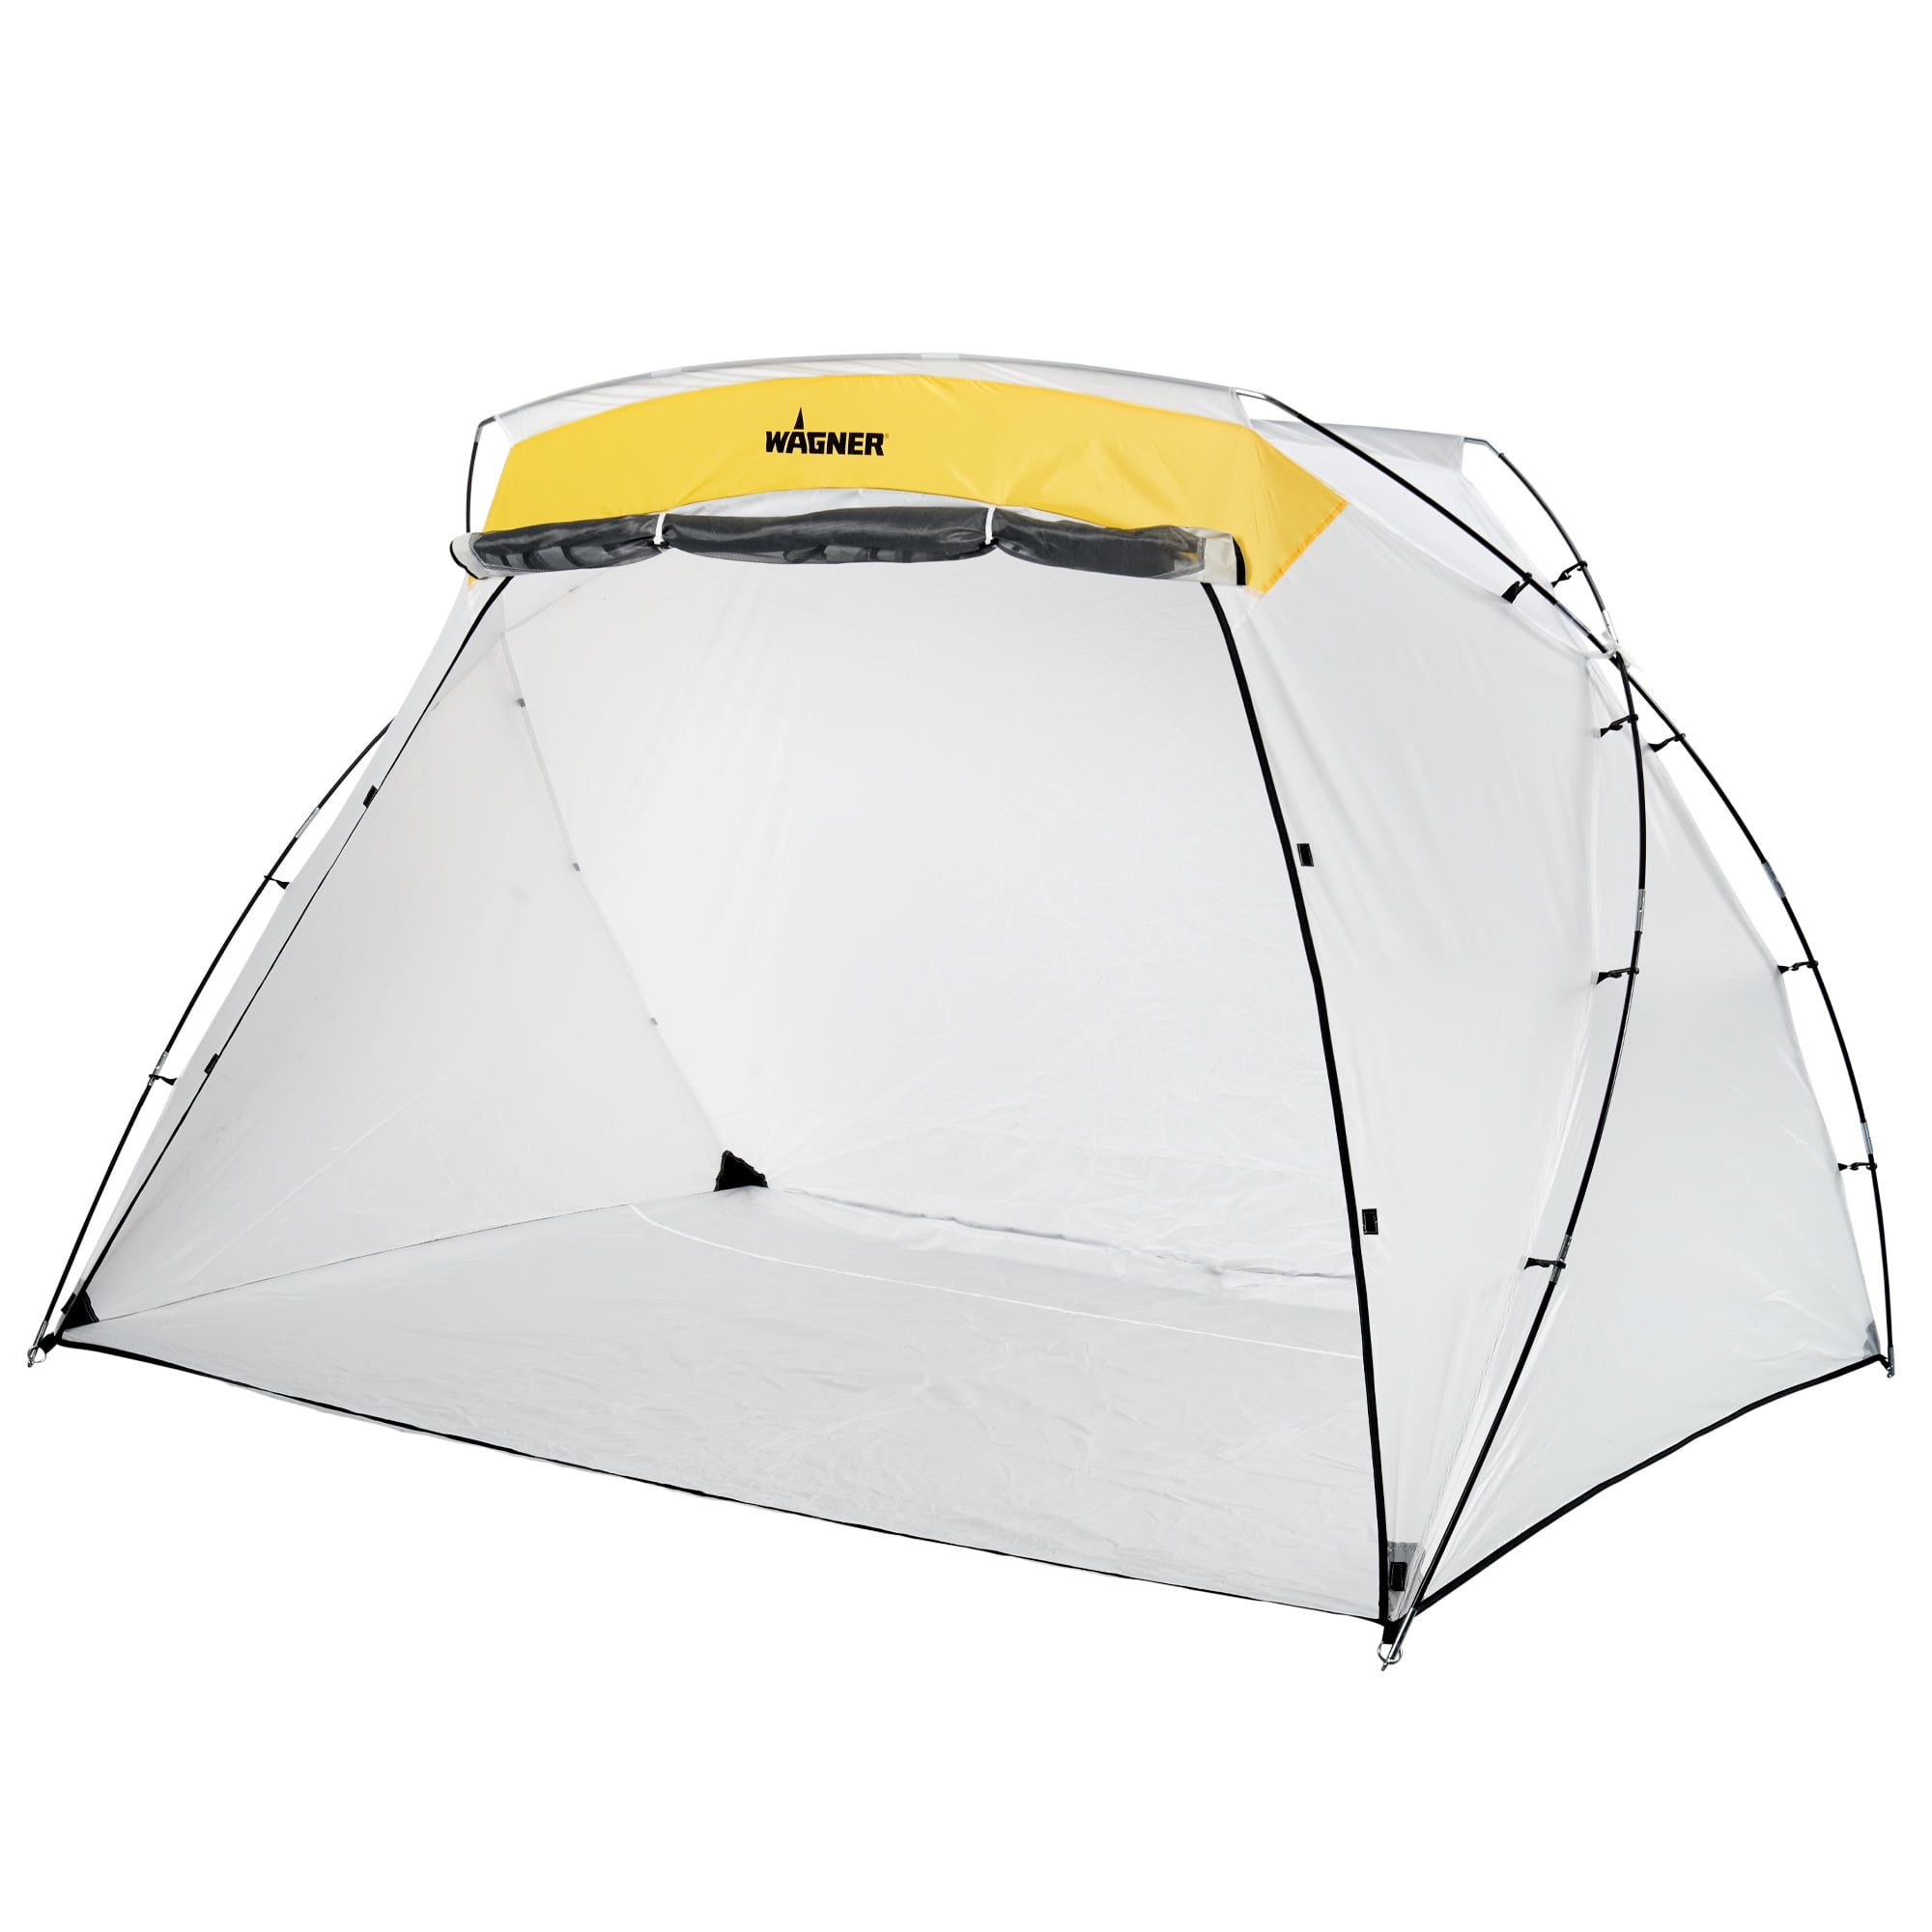 HomeRight Large 3 Sided Spray Shelter with 1 Mesh Wall and Carrying Bag, White